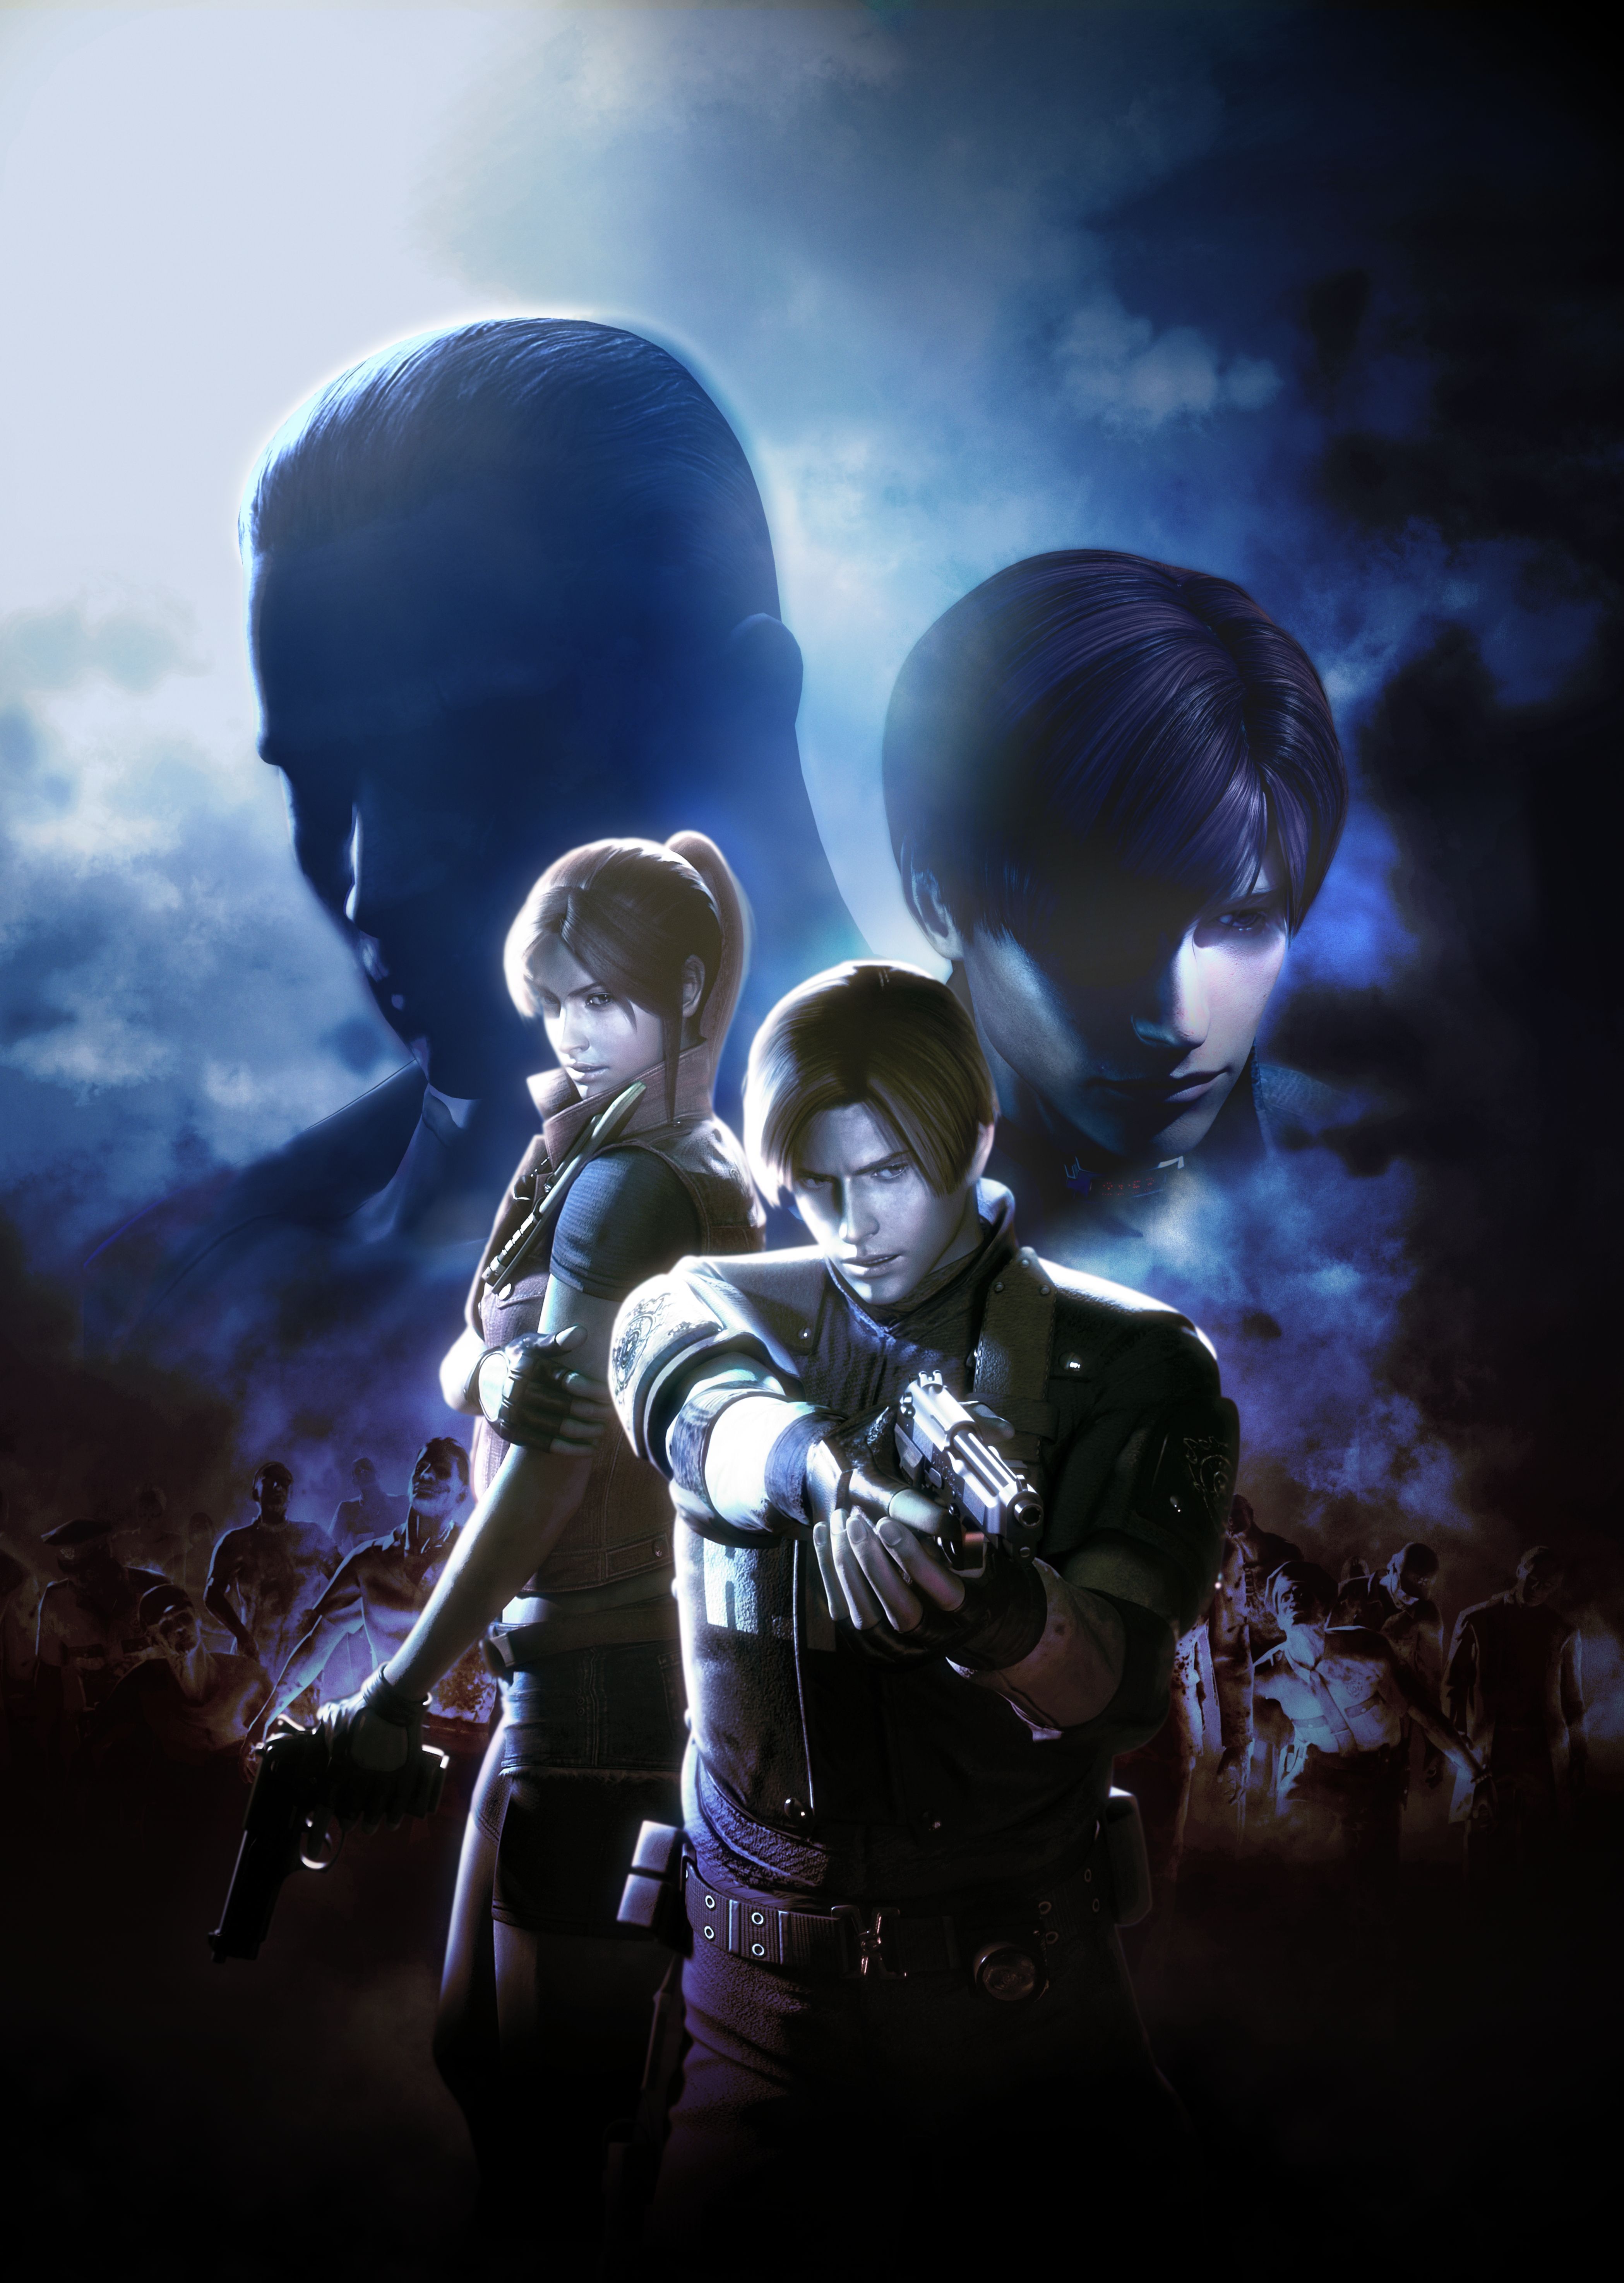 Resident Evil: The Darkside Chronicles Picture